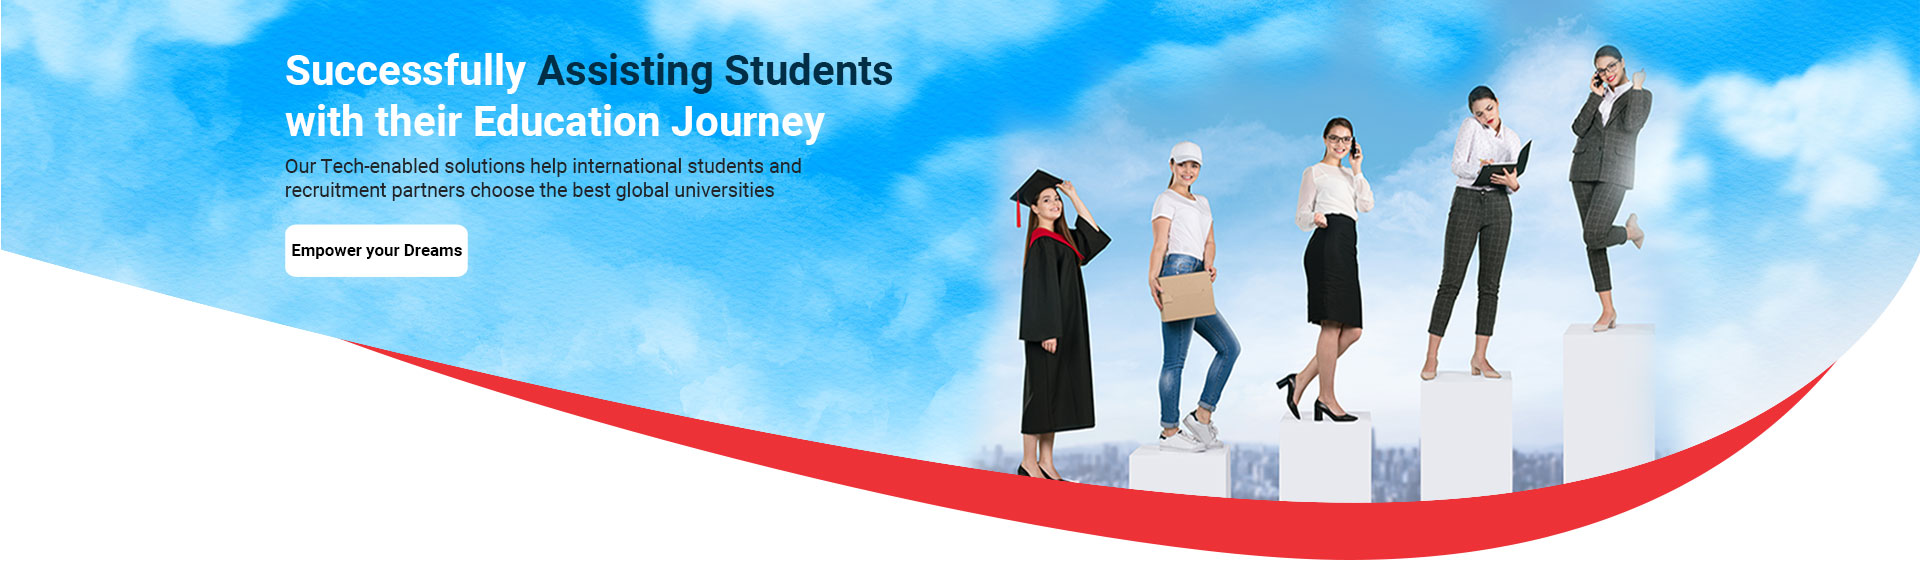 Successfully assisting students wuth their education journey